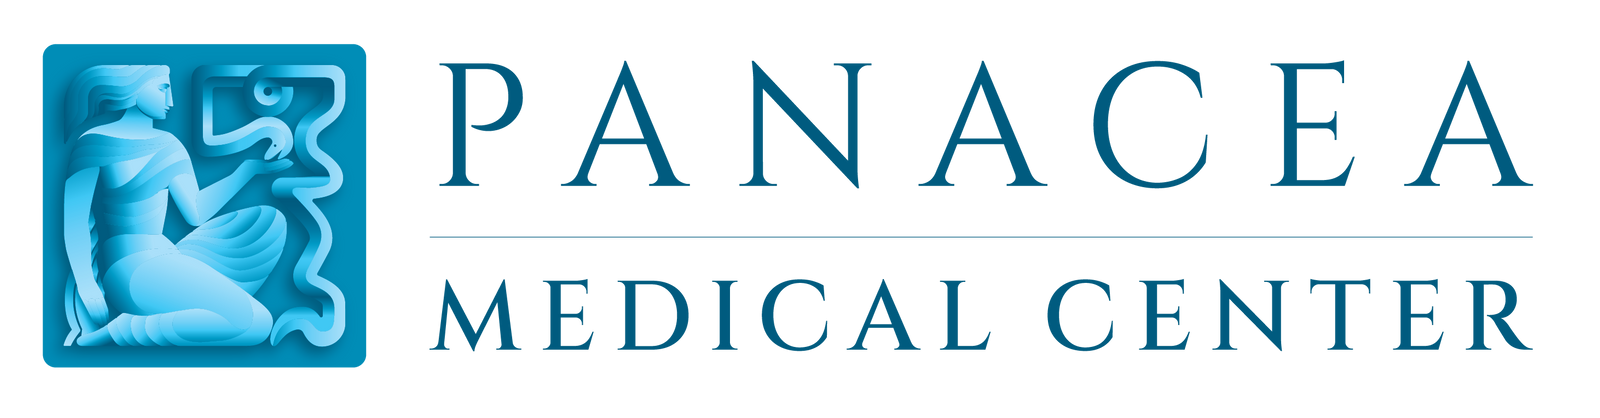 A logo for panacea medical center with a lion on it